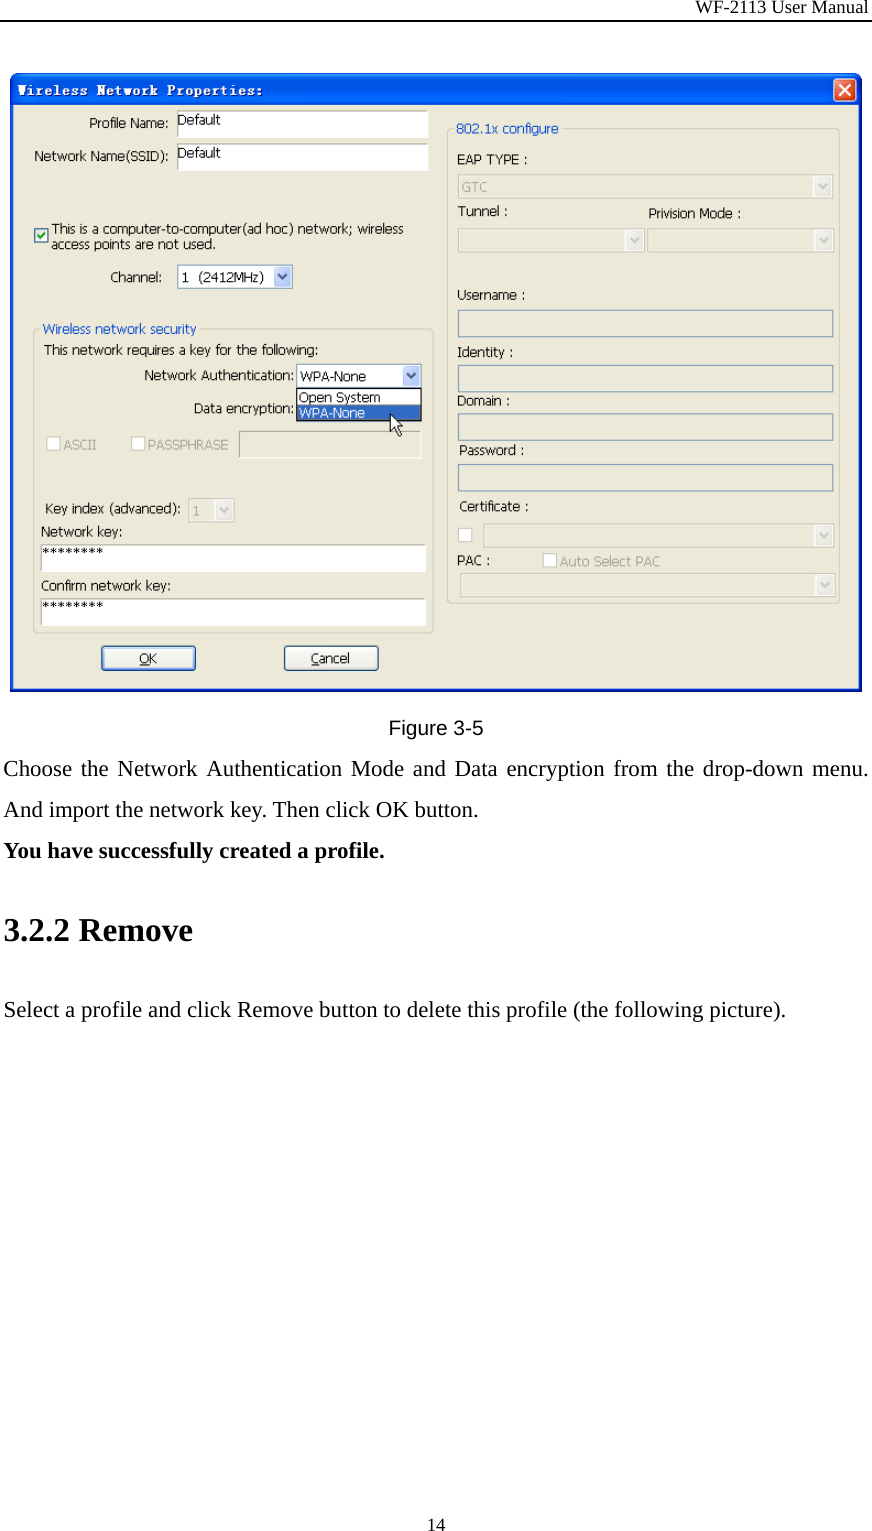 WF-2113 User Manual 14 Figure 3-5 Choose the Network Authentication Mode and Data encryption from the drop-down menu. And import the network key. Then click OK button.   You have successfully created a profile. 3.2.2 Remove Select a profile and click Remove button to delete this profile (the following picture). 